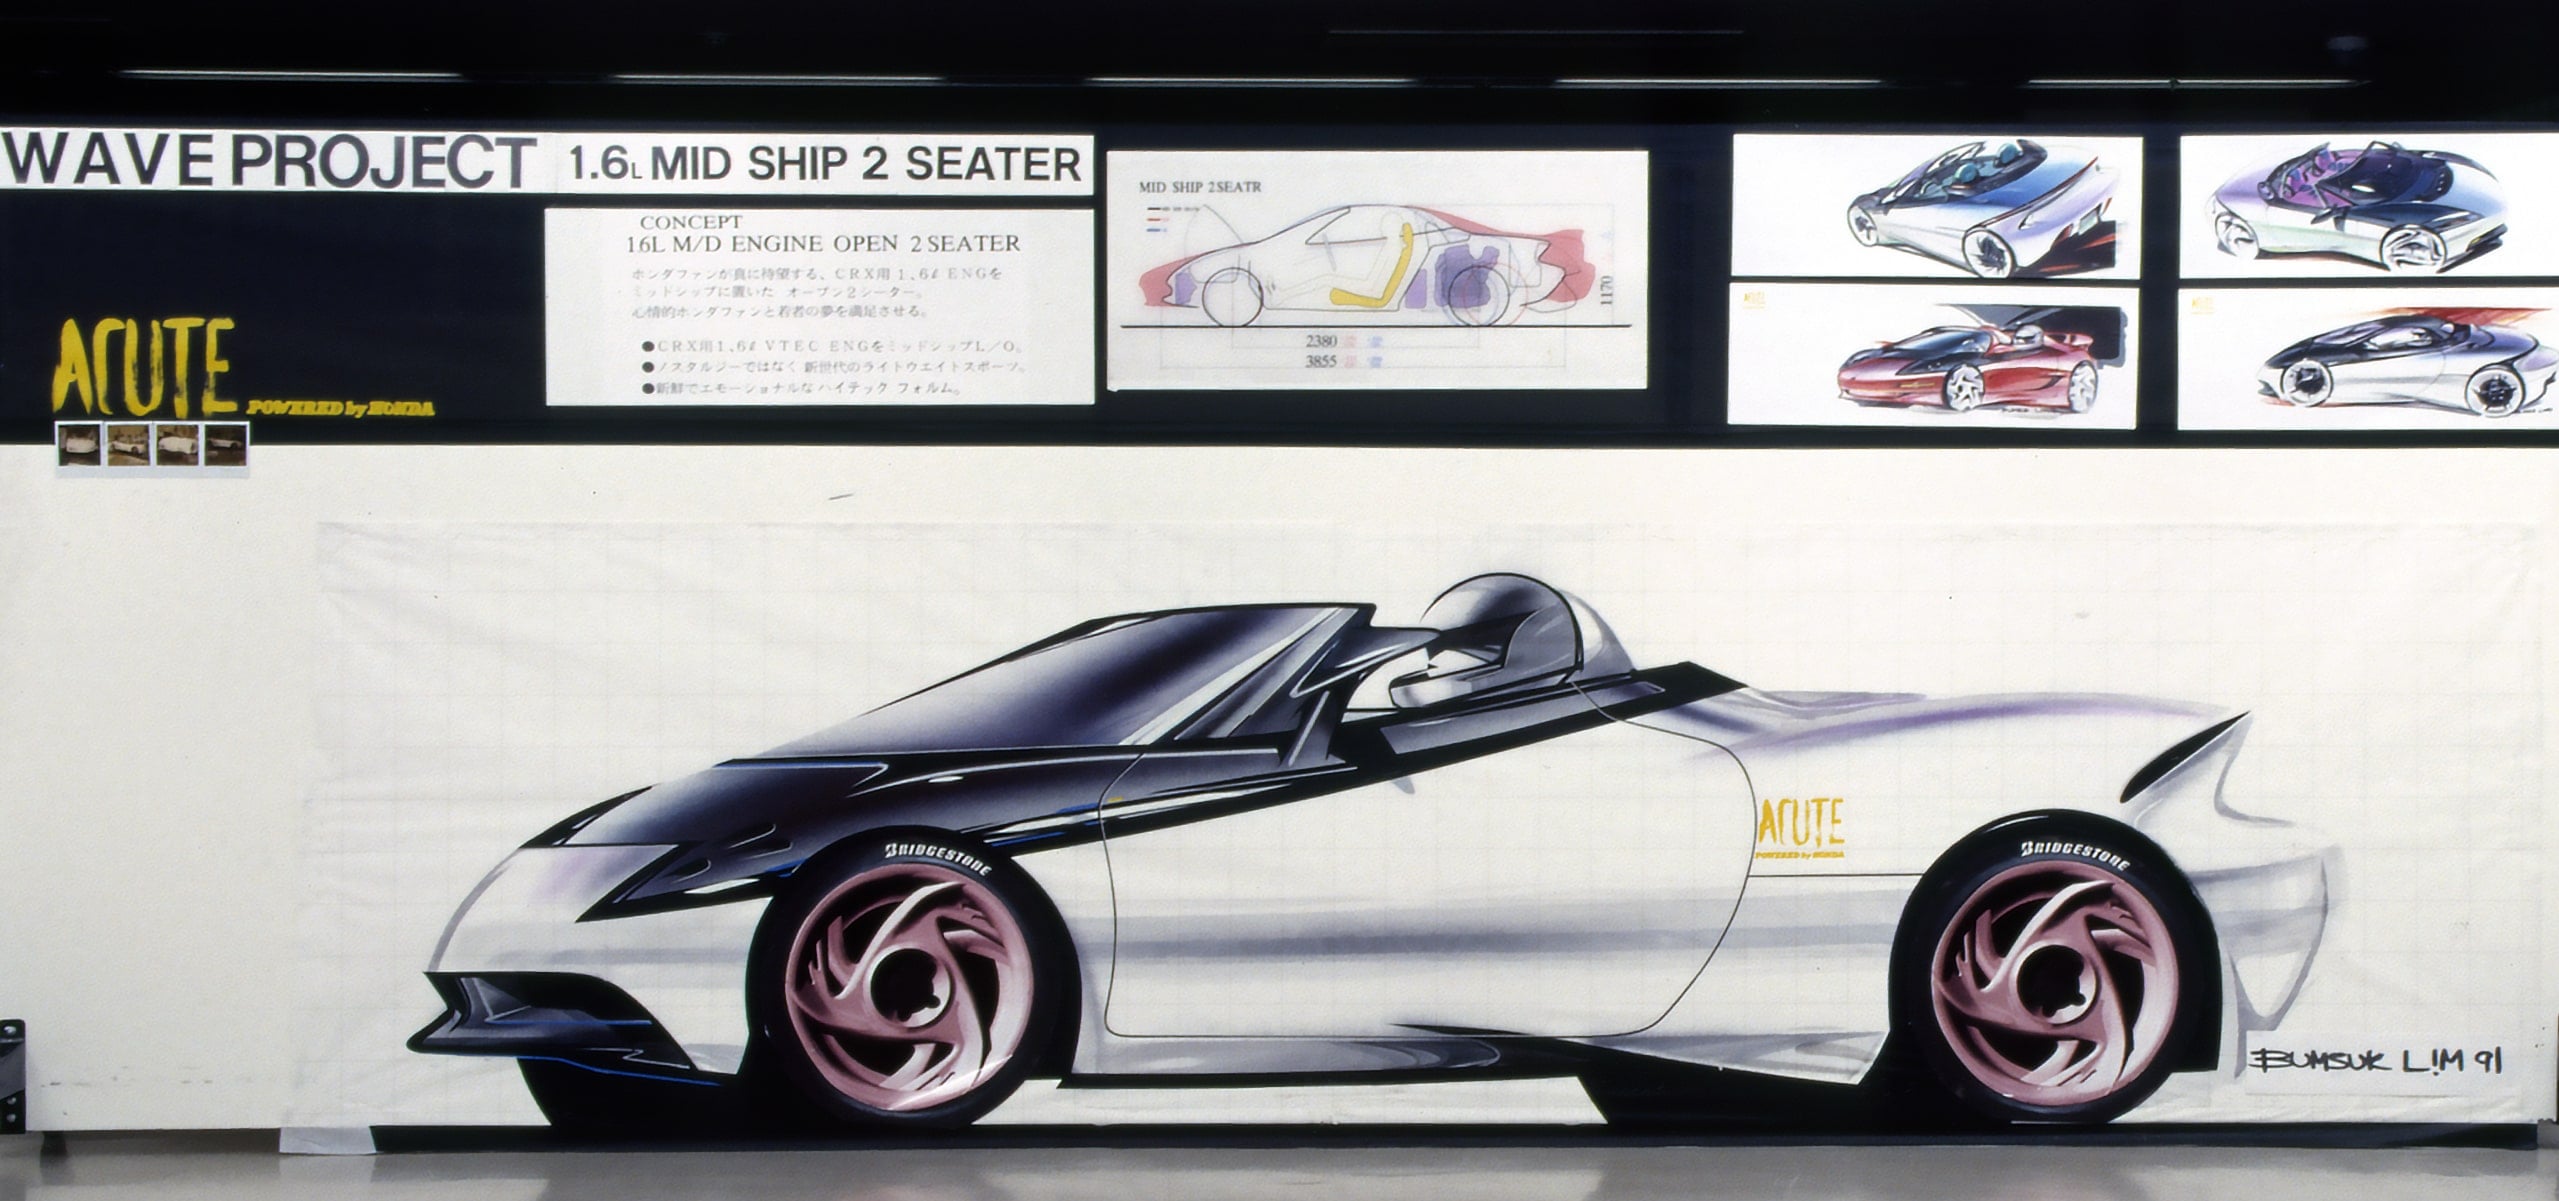 Never before seen Honda concepts reveal sports cars that didn't